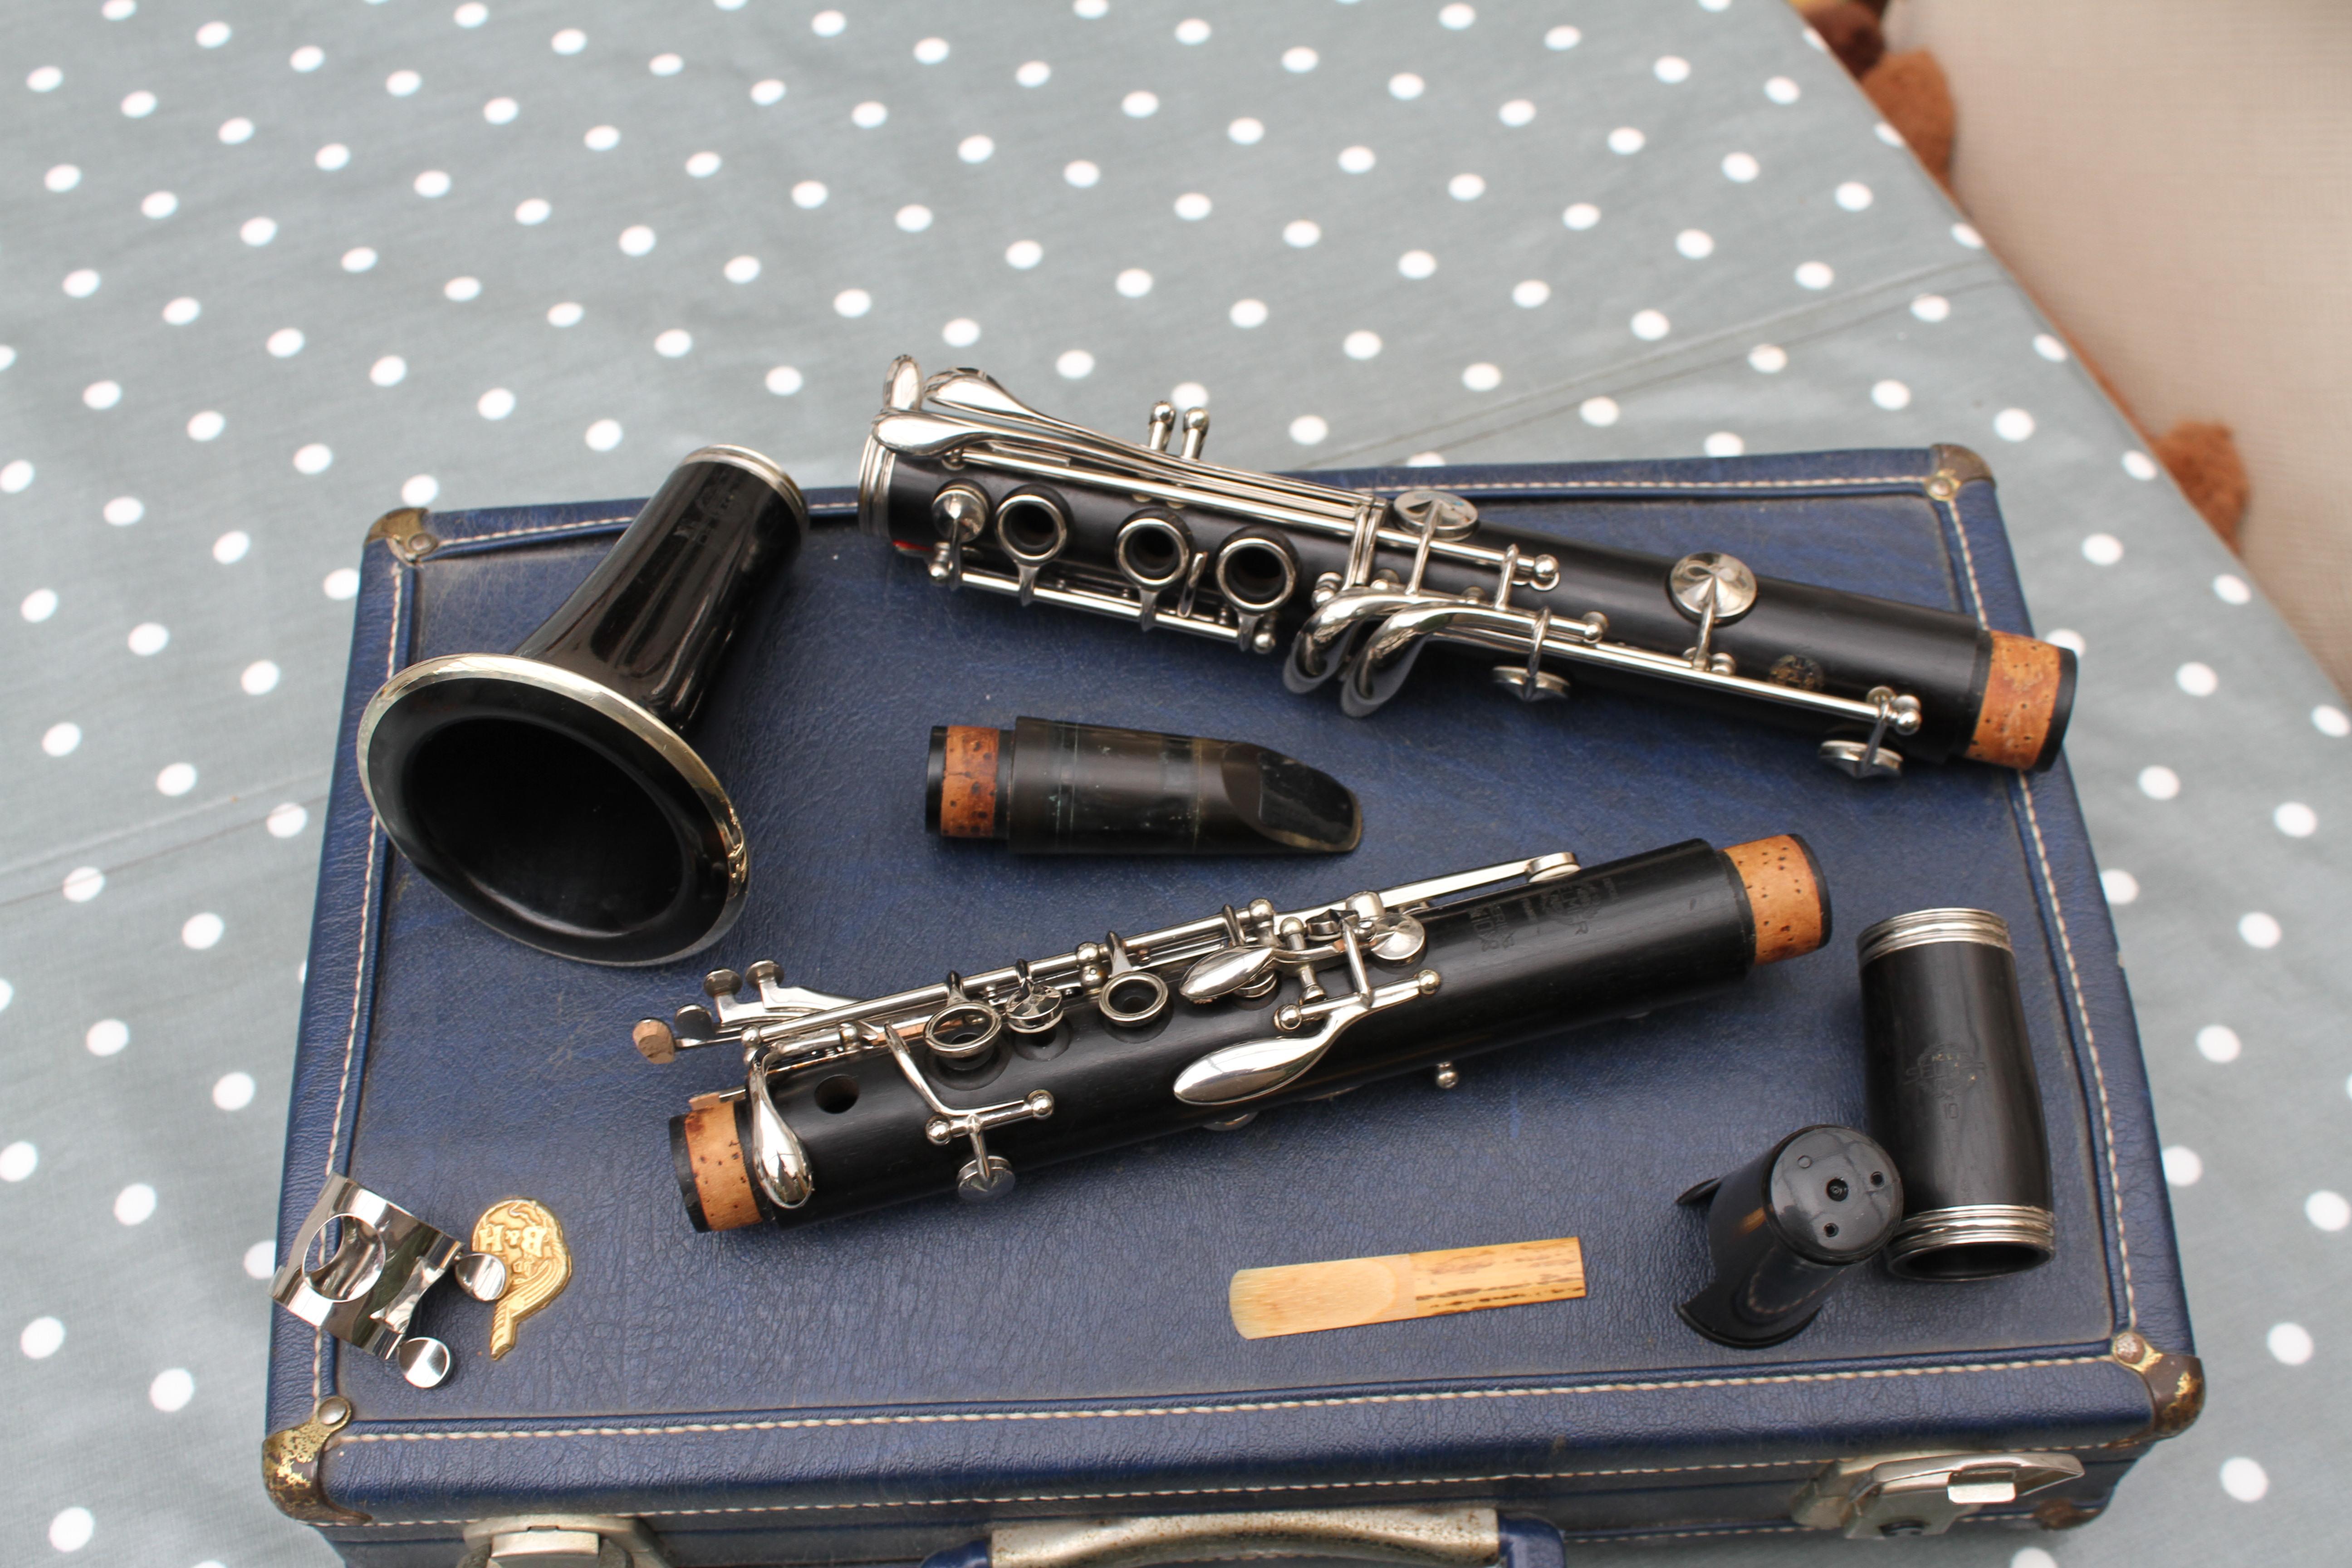 bundy clarinet serial number search